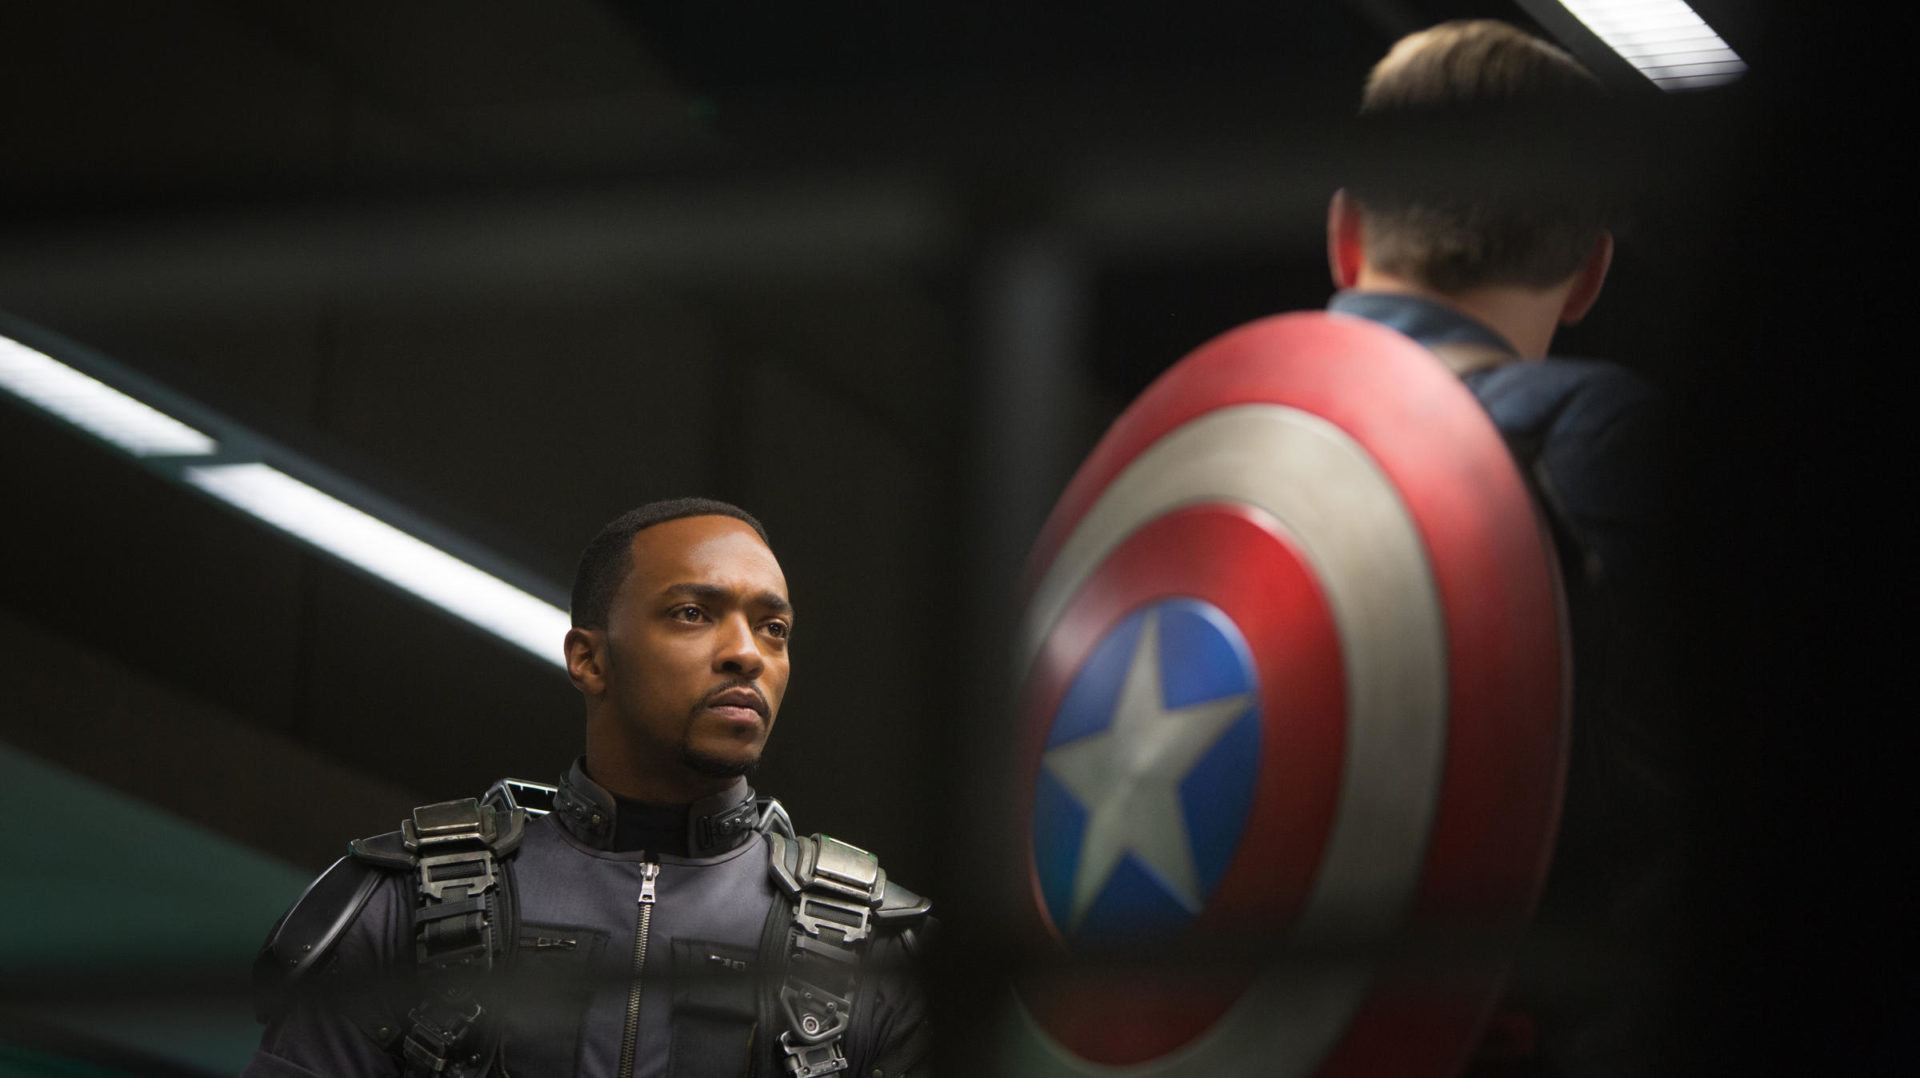 Anthony Mackie as Falcon and Chris Evans as Captain America.